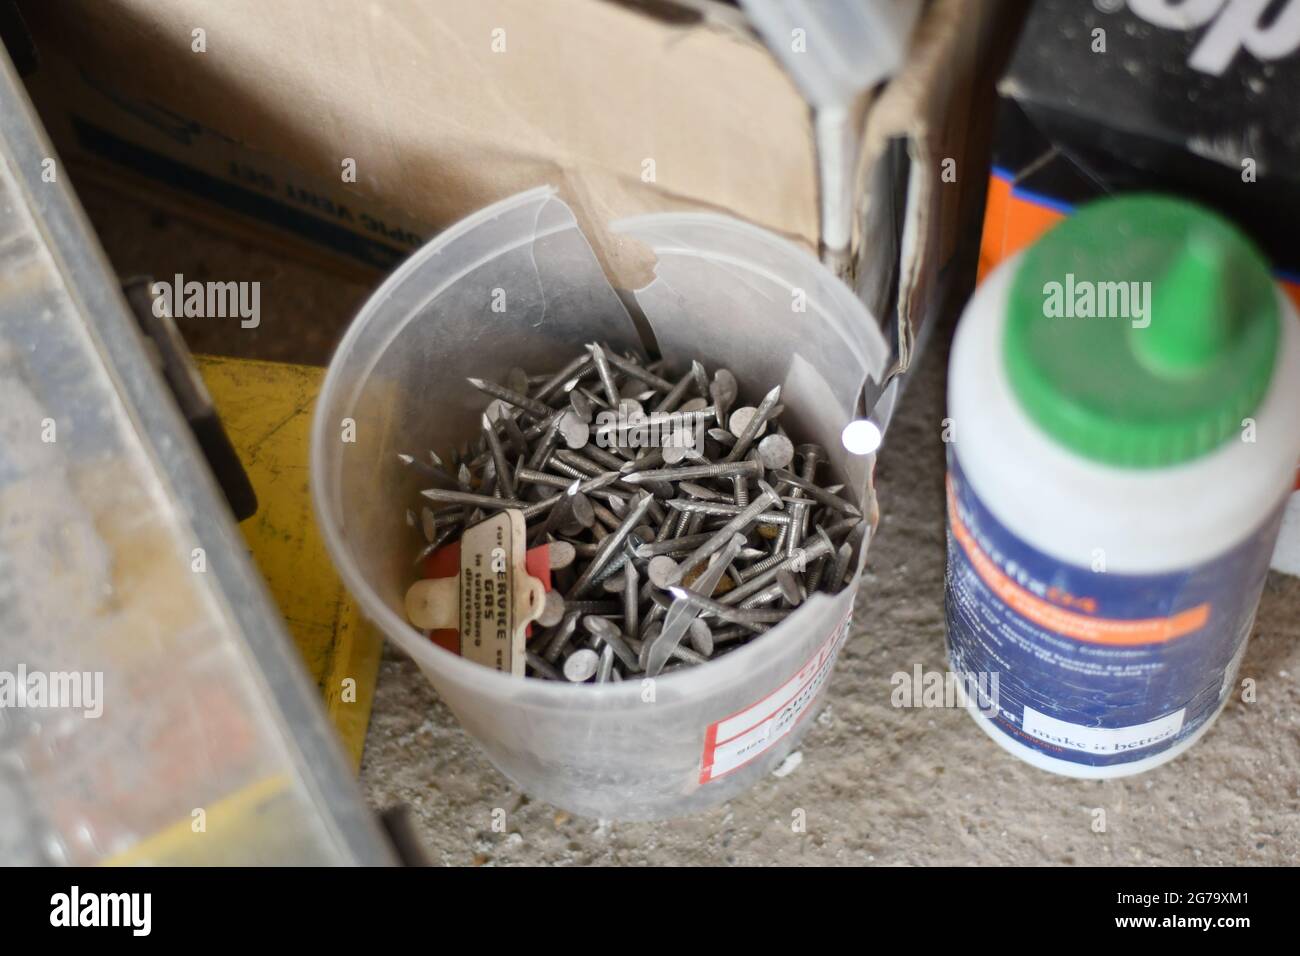 A makeshift tub of nails and bottle of glue on a construction site Stock Photo